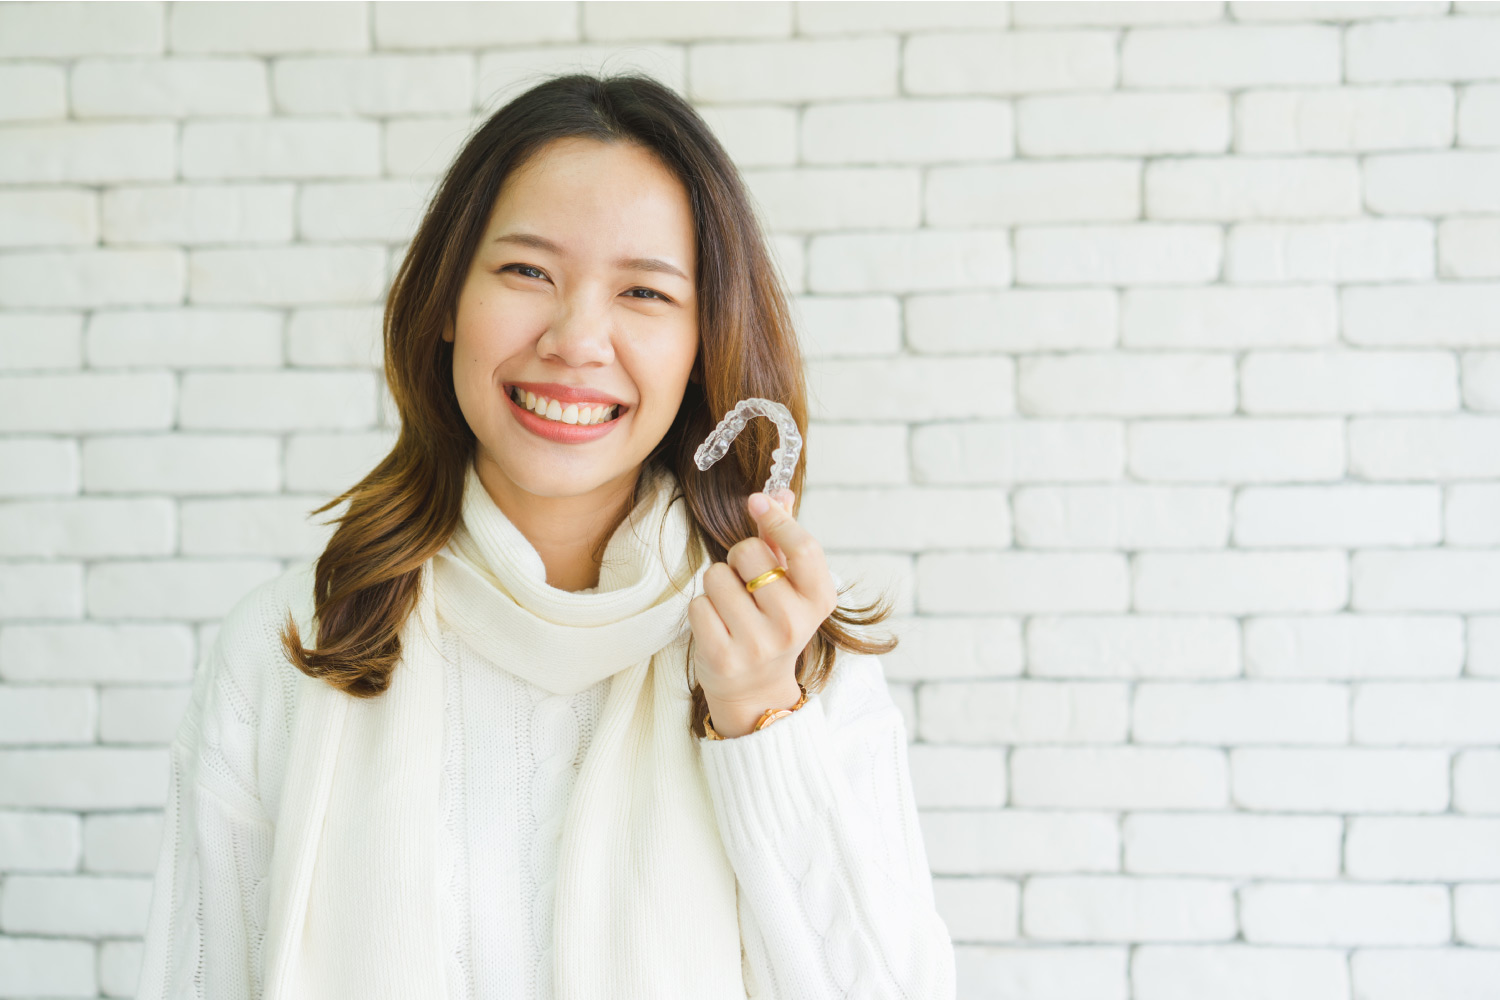 Asian woman in a white turtleneck sweater smiles while holding her Invisalign aligner